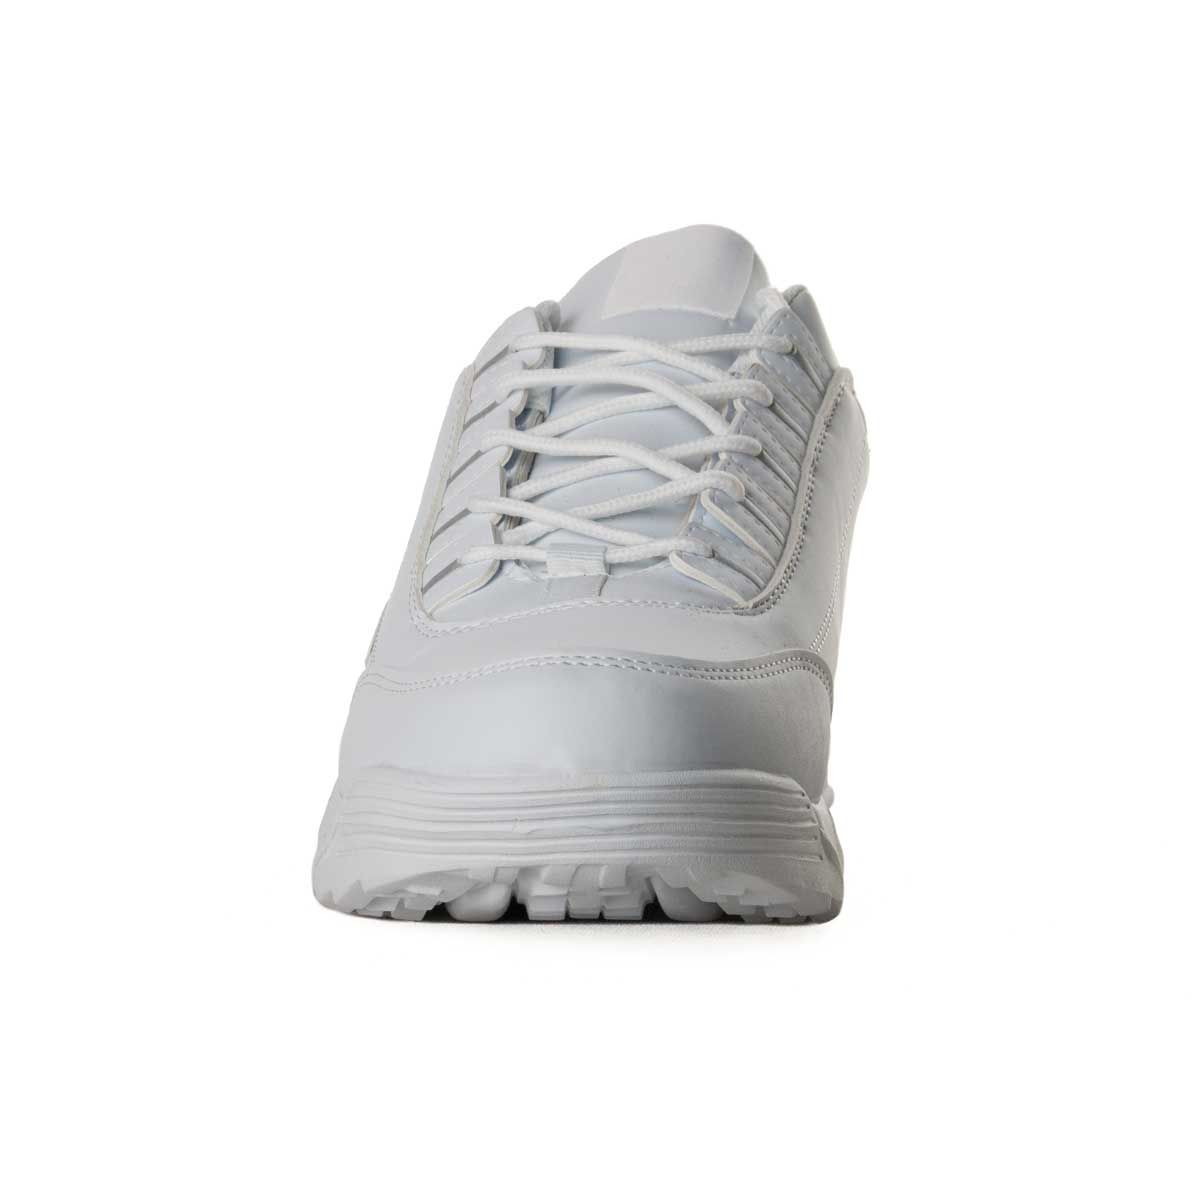 Comfortable and perfect sneaker for day to day. Casual and original.